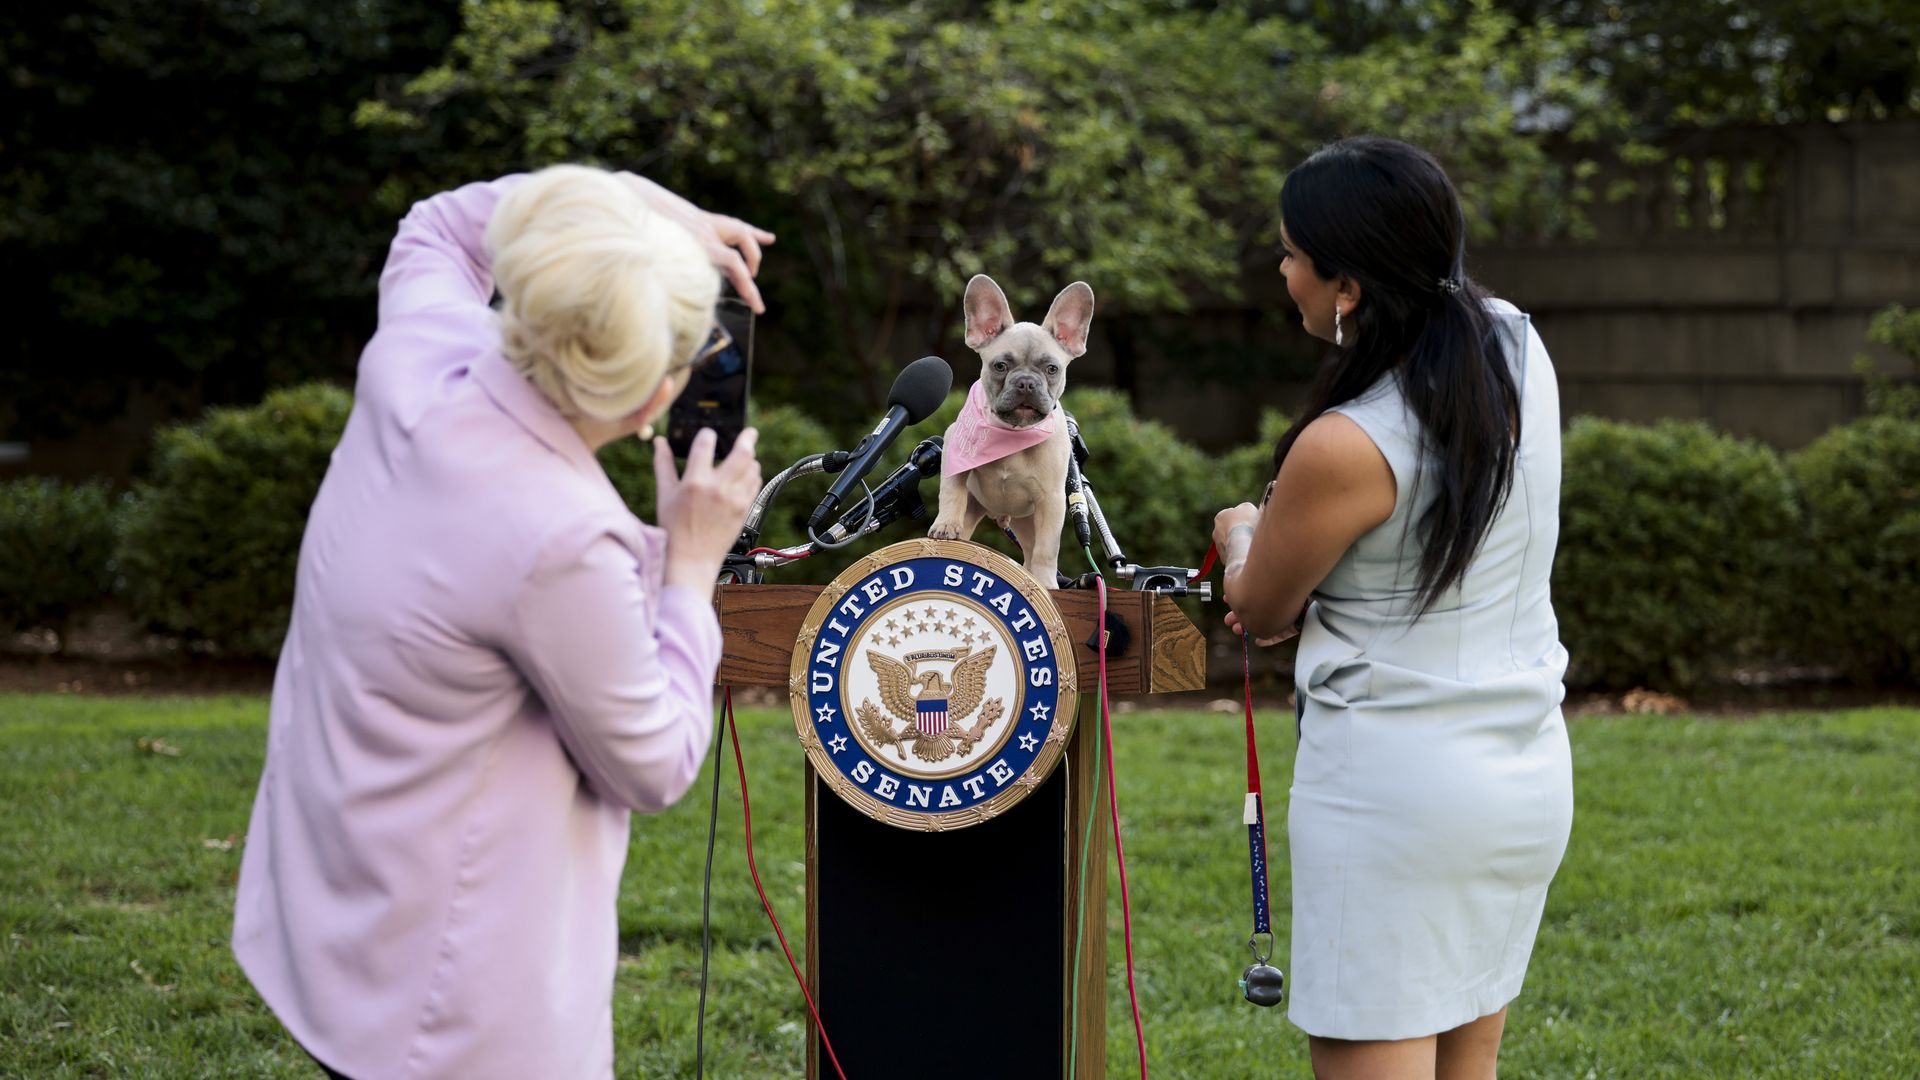 A congressional staffer is seen taking a picture of a dog atop a lectern before a news conference about ending animal testing.